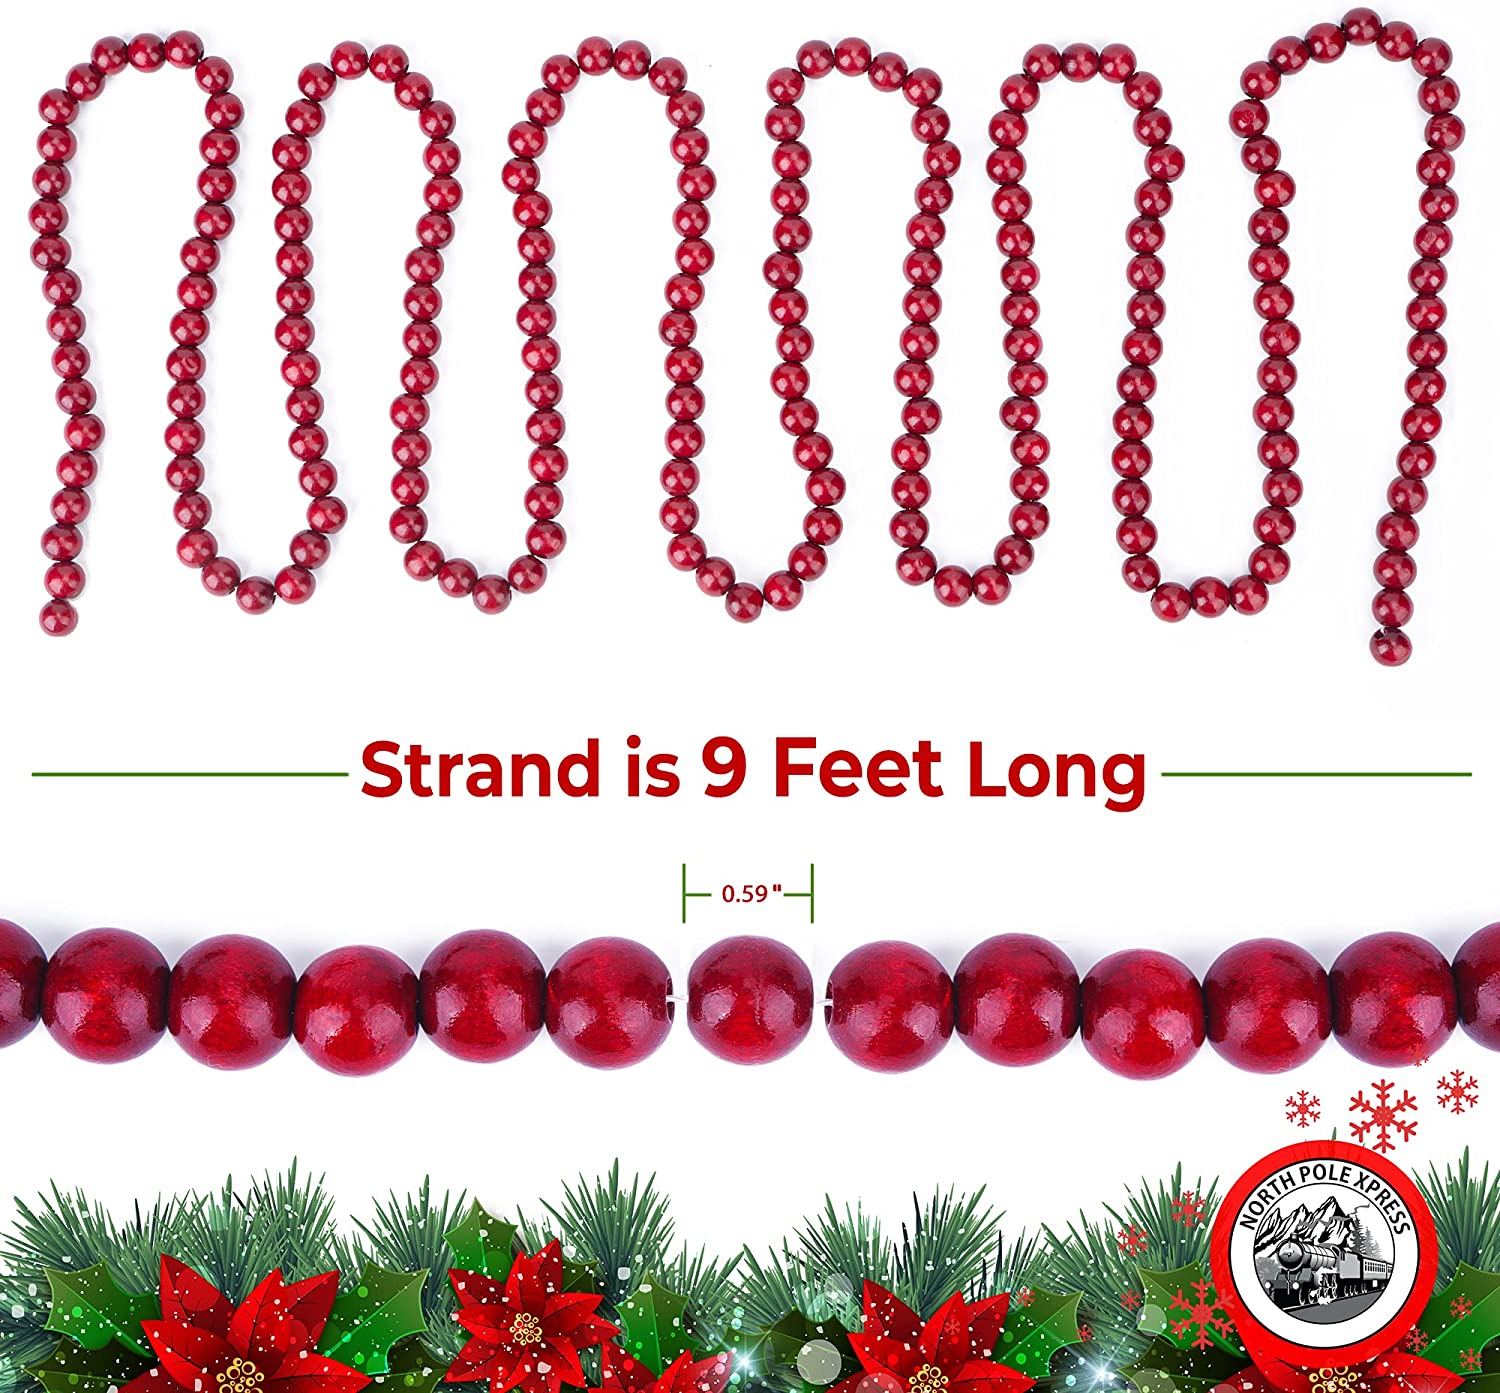 Burgundy Cranberry Wooden Bead Garland-This Cranberry Color Christmas  Garland is Made of Wood Beads so it can be Used Year After Year by Factory